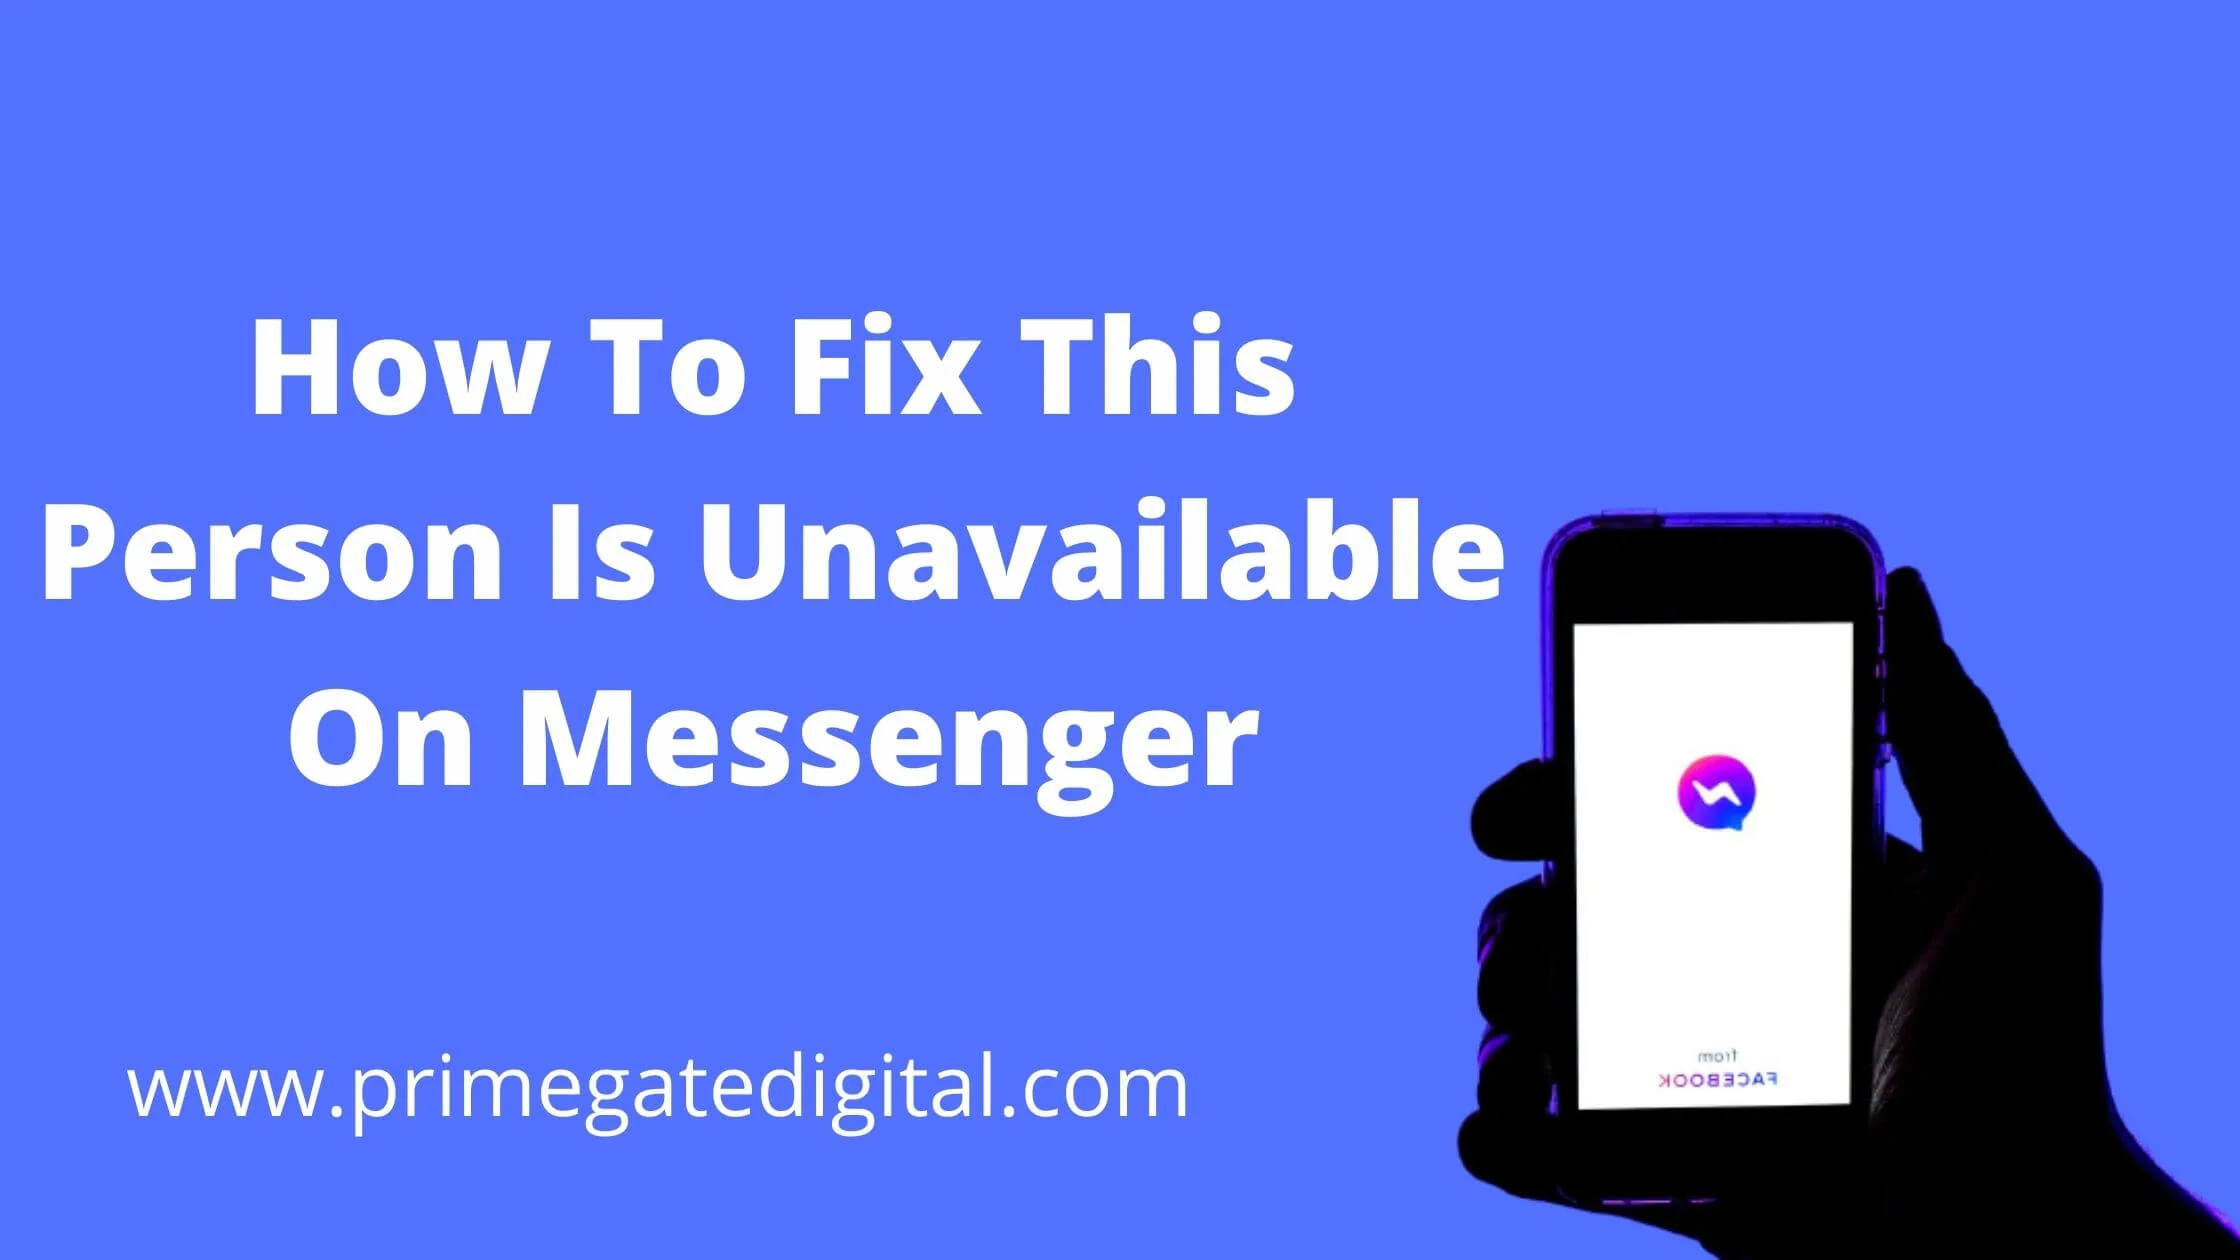 How To Fix This Person Is Unavailable On Messenger